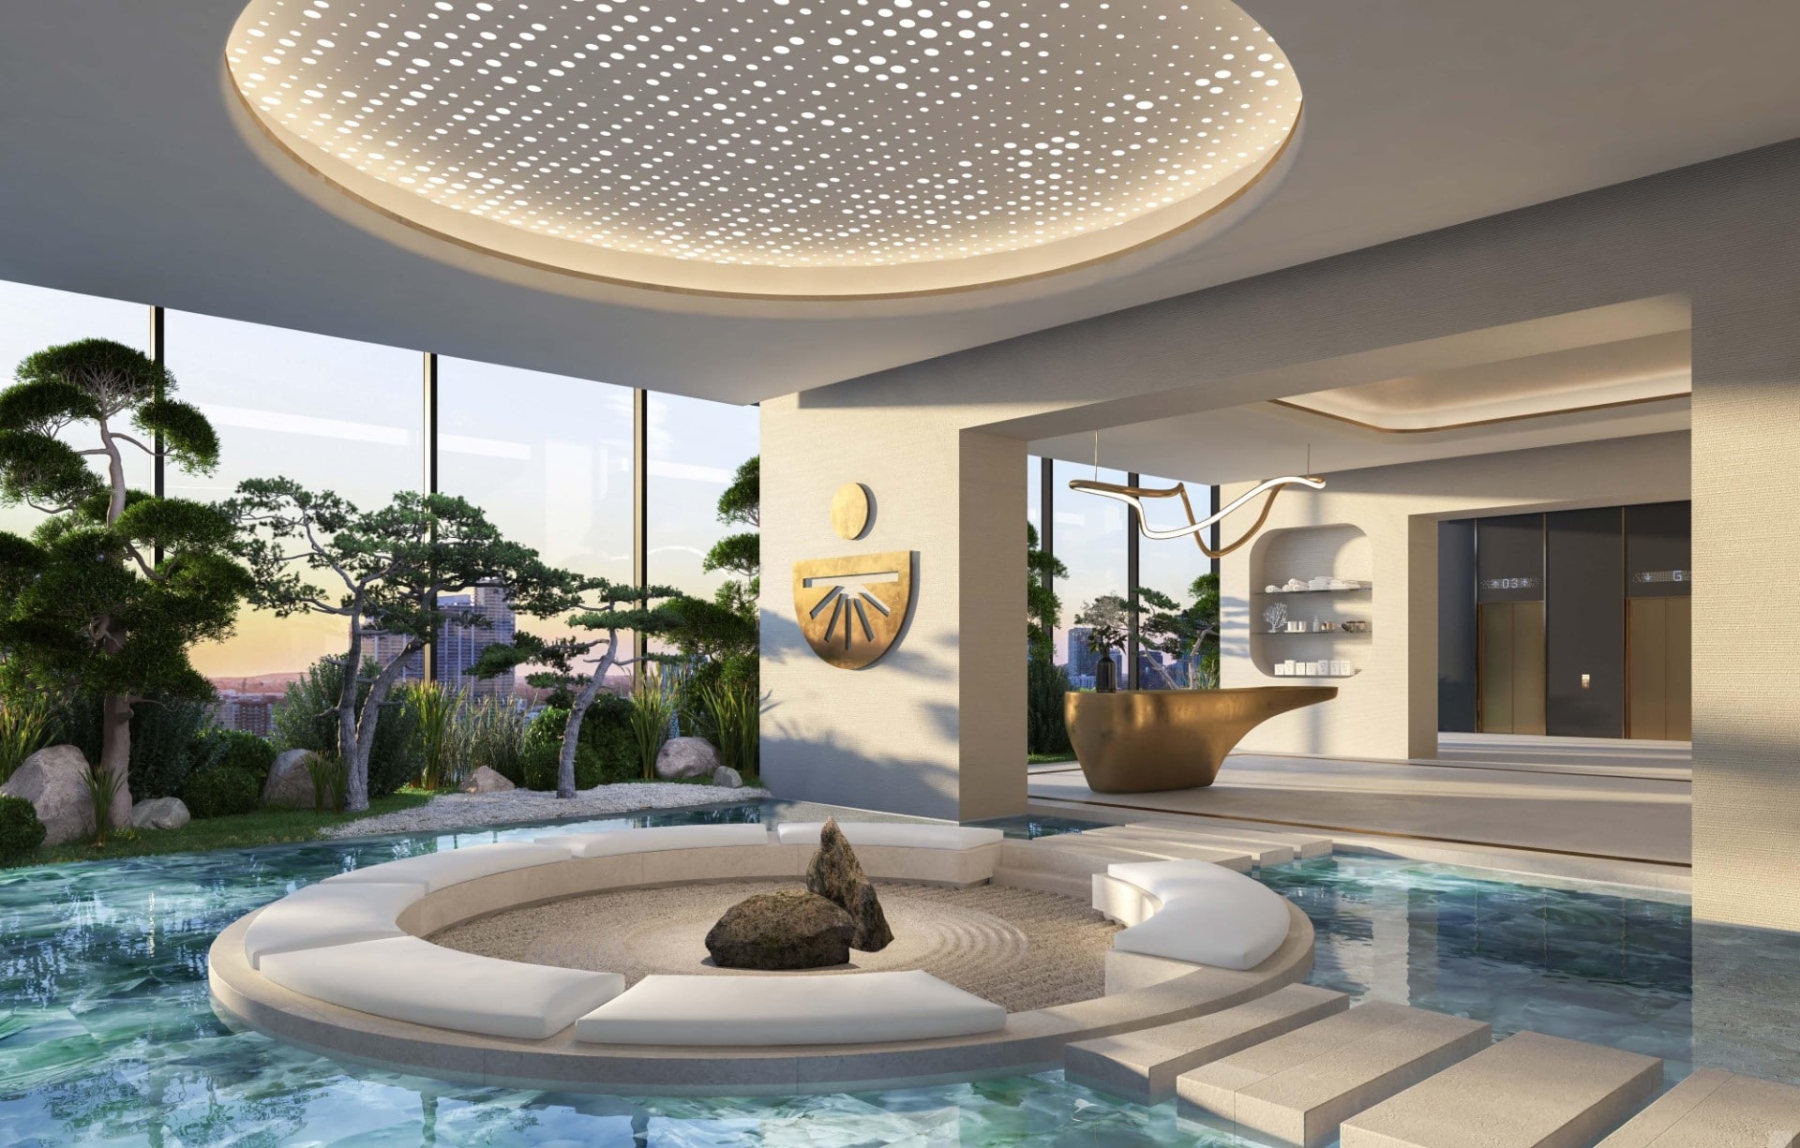 Rendering of E11even Hotel and Residences pool with spa